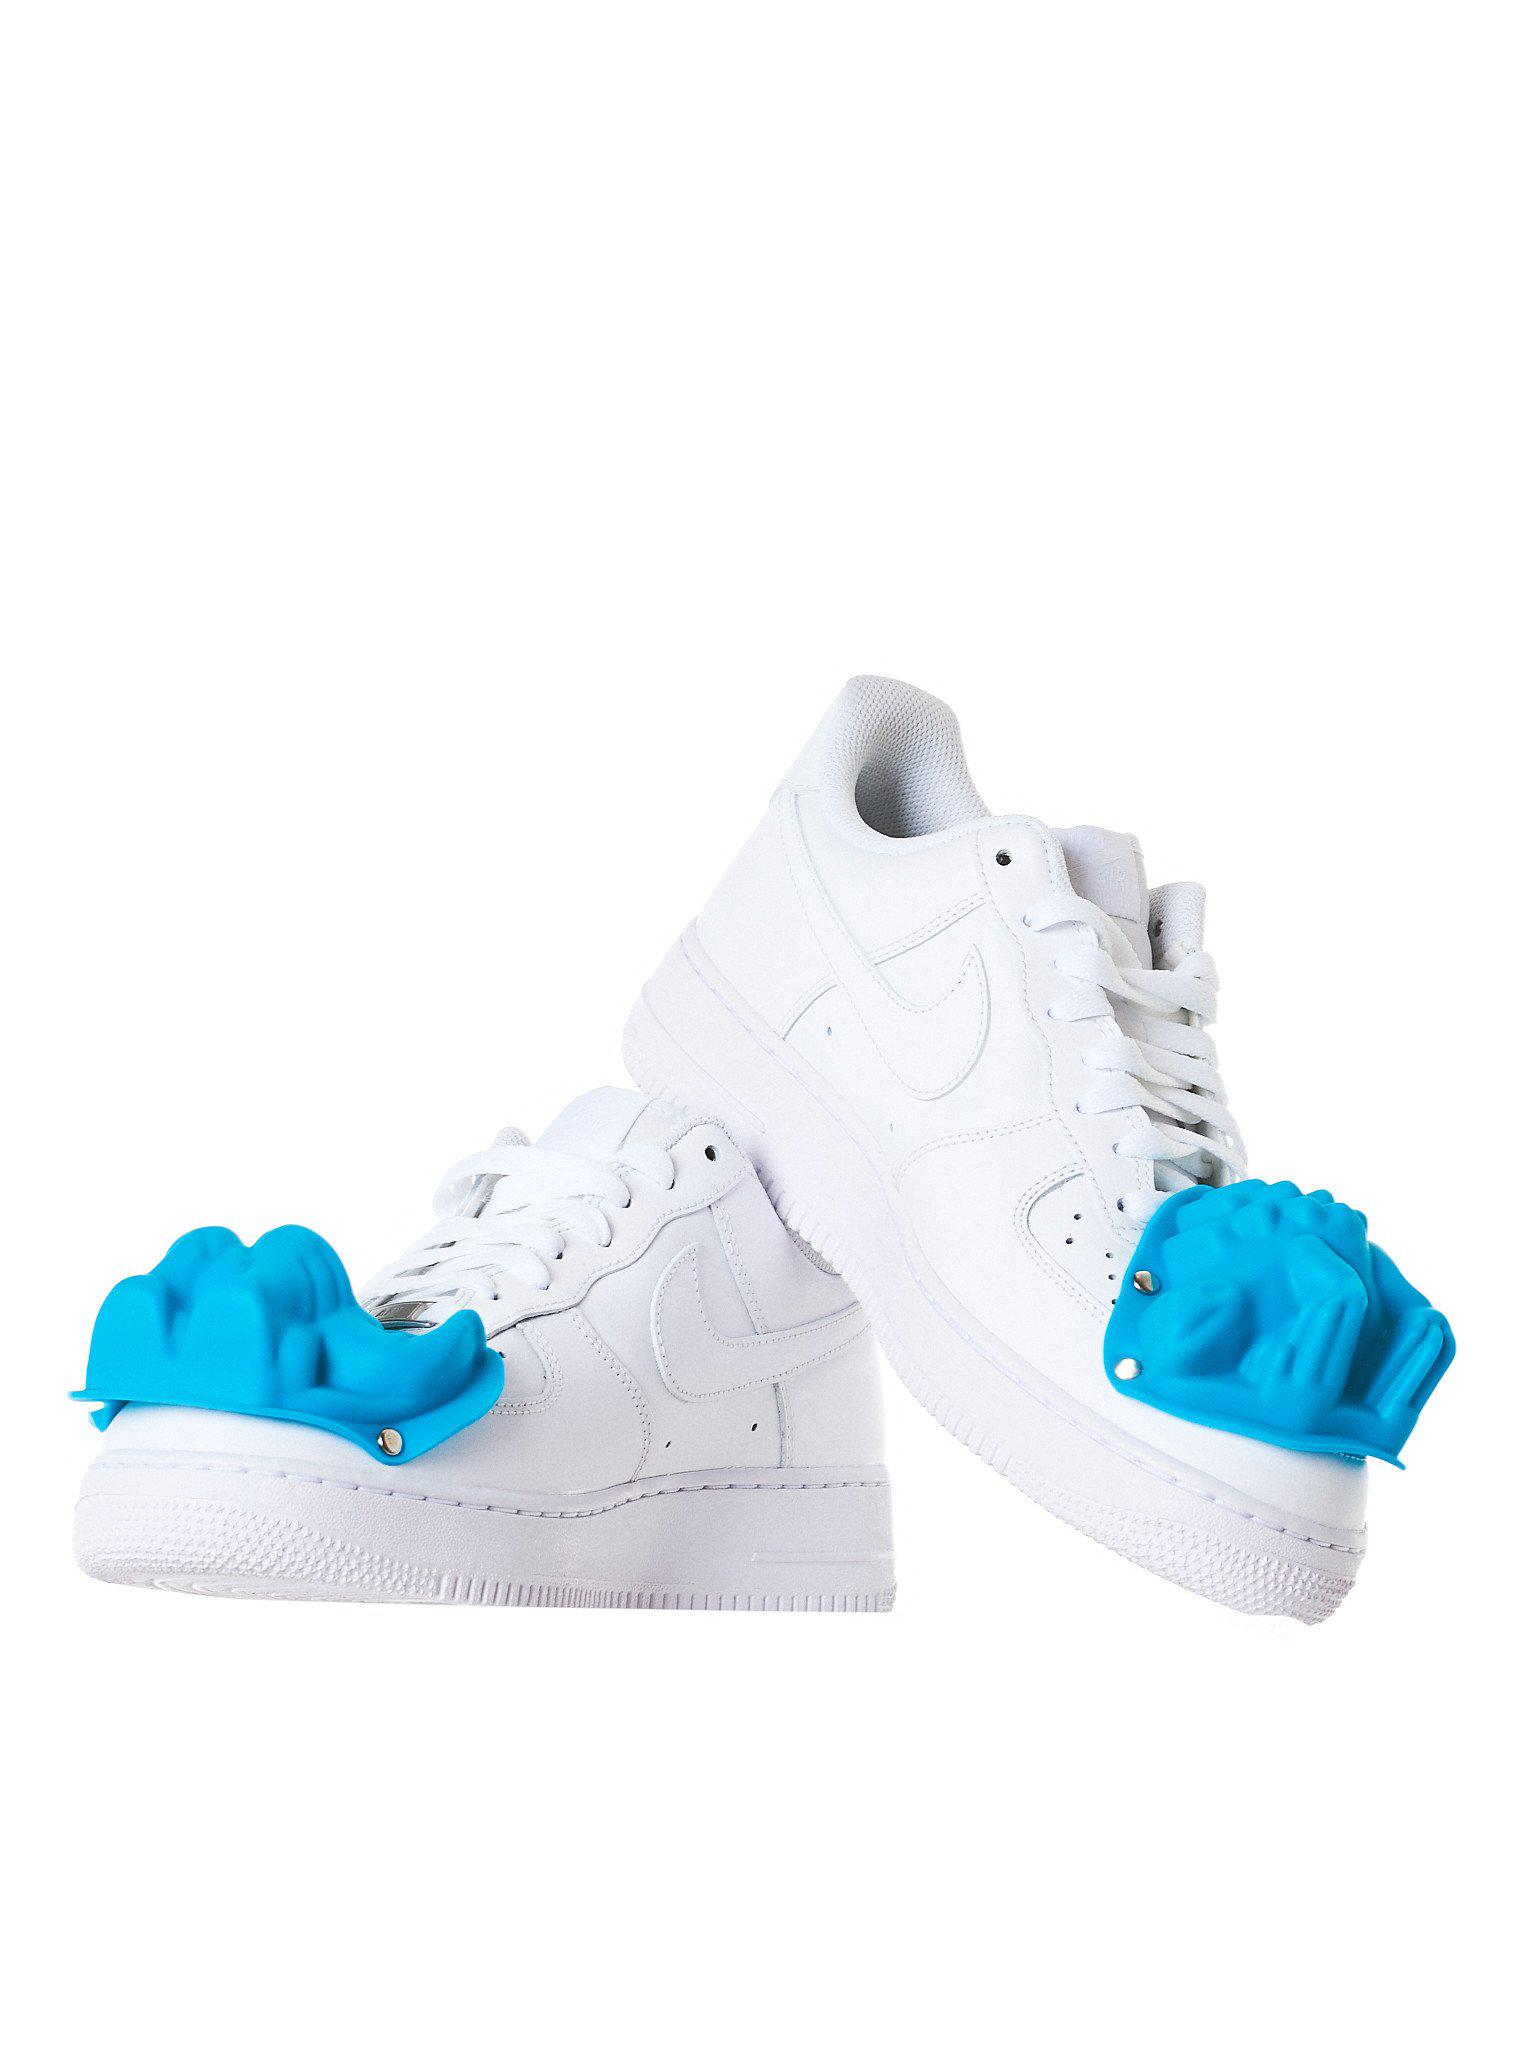 Comme des Garçons Nike Moulded Dinosaur Air Force 1 Sneakers in 2 (Blue